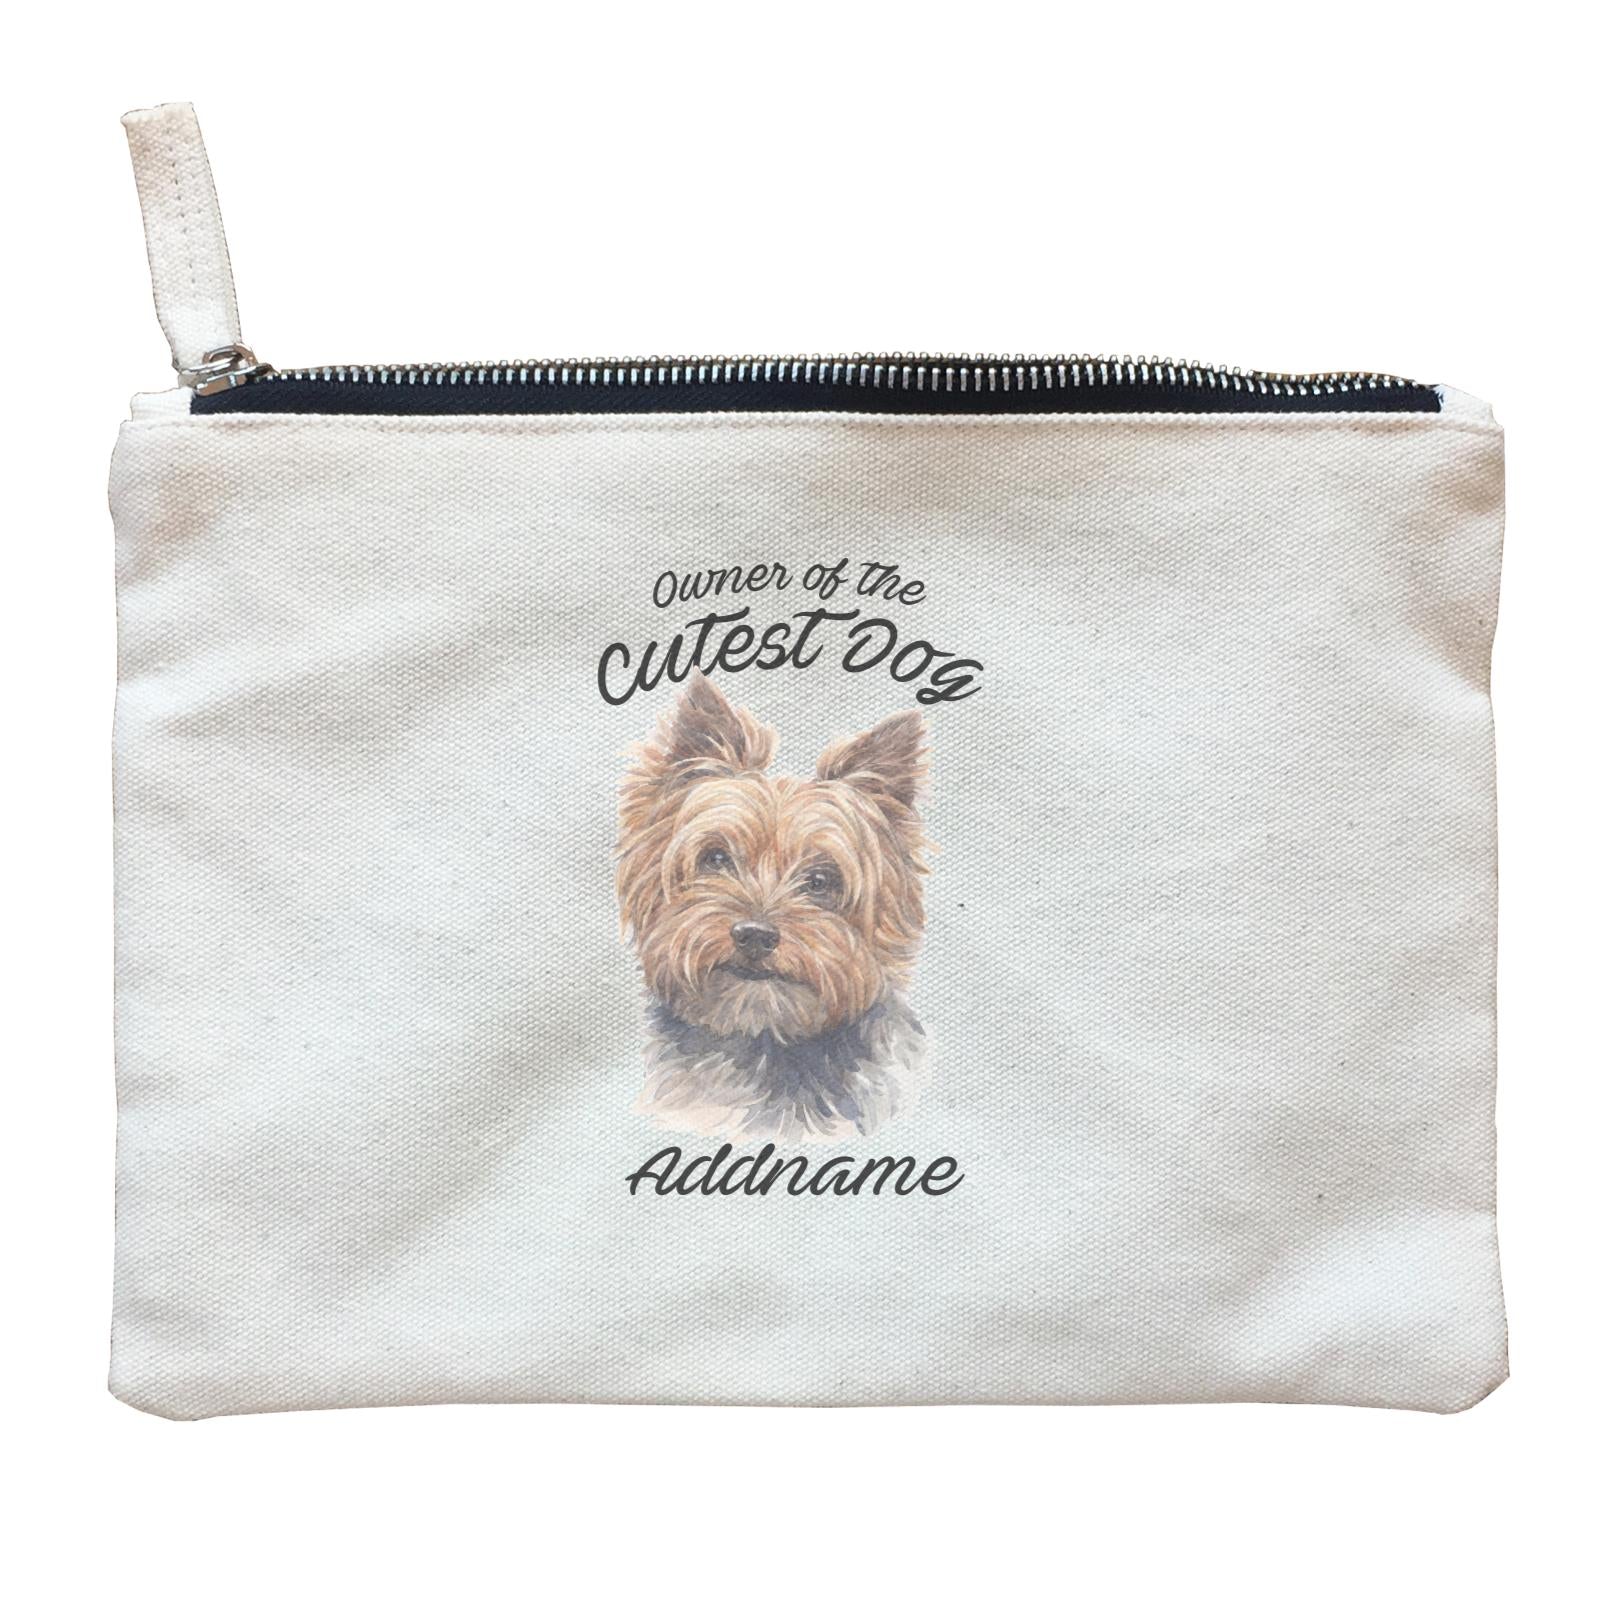 Watercolor Dog Owner Of The Cutest Dog Yorkshire Terrier Addname Zipper Pouch